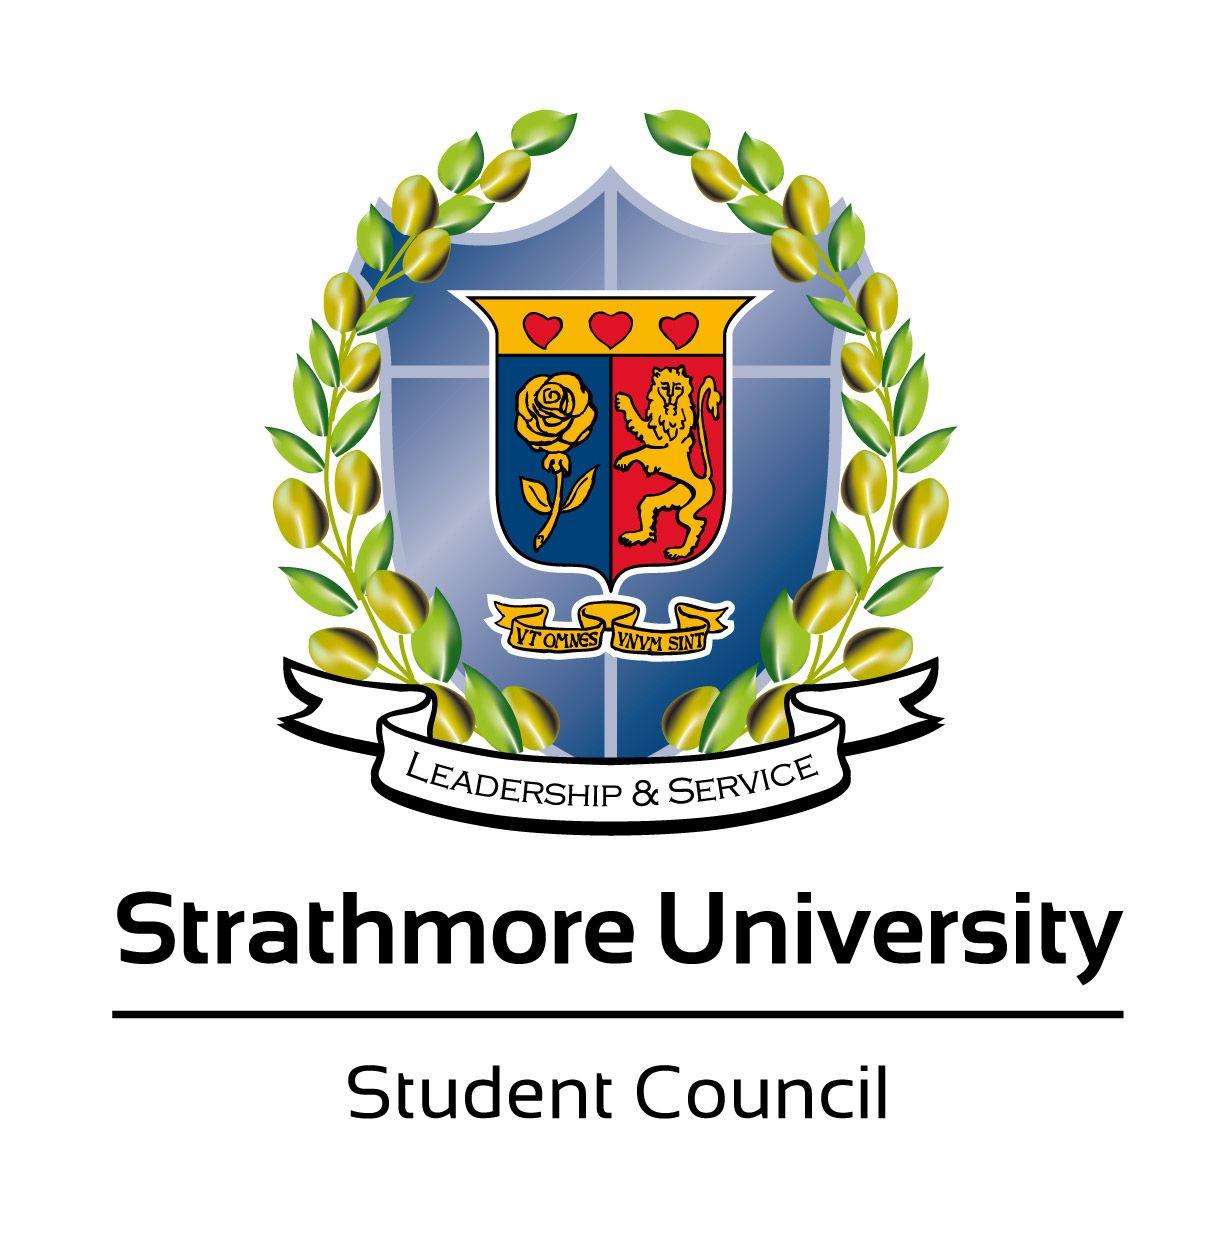 Student Council Logo - THE STUDENT COUNCIL | Strathmore Student Council